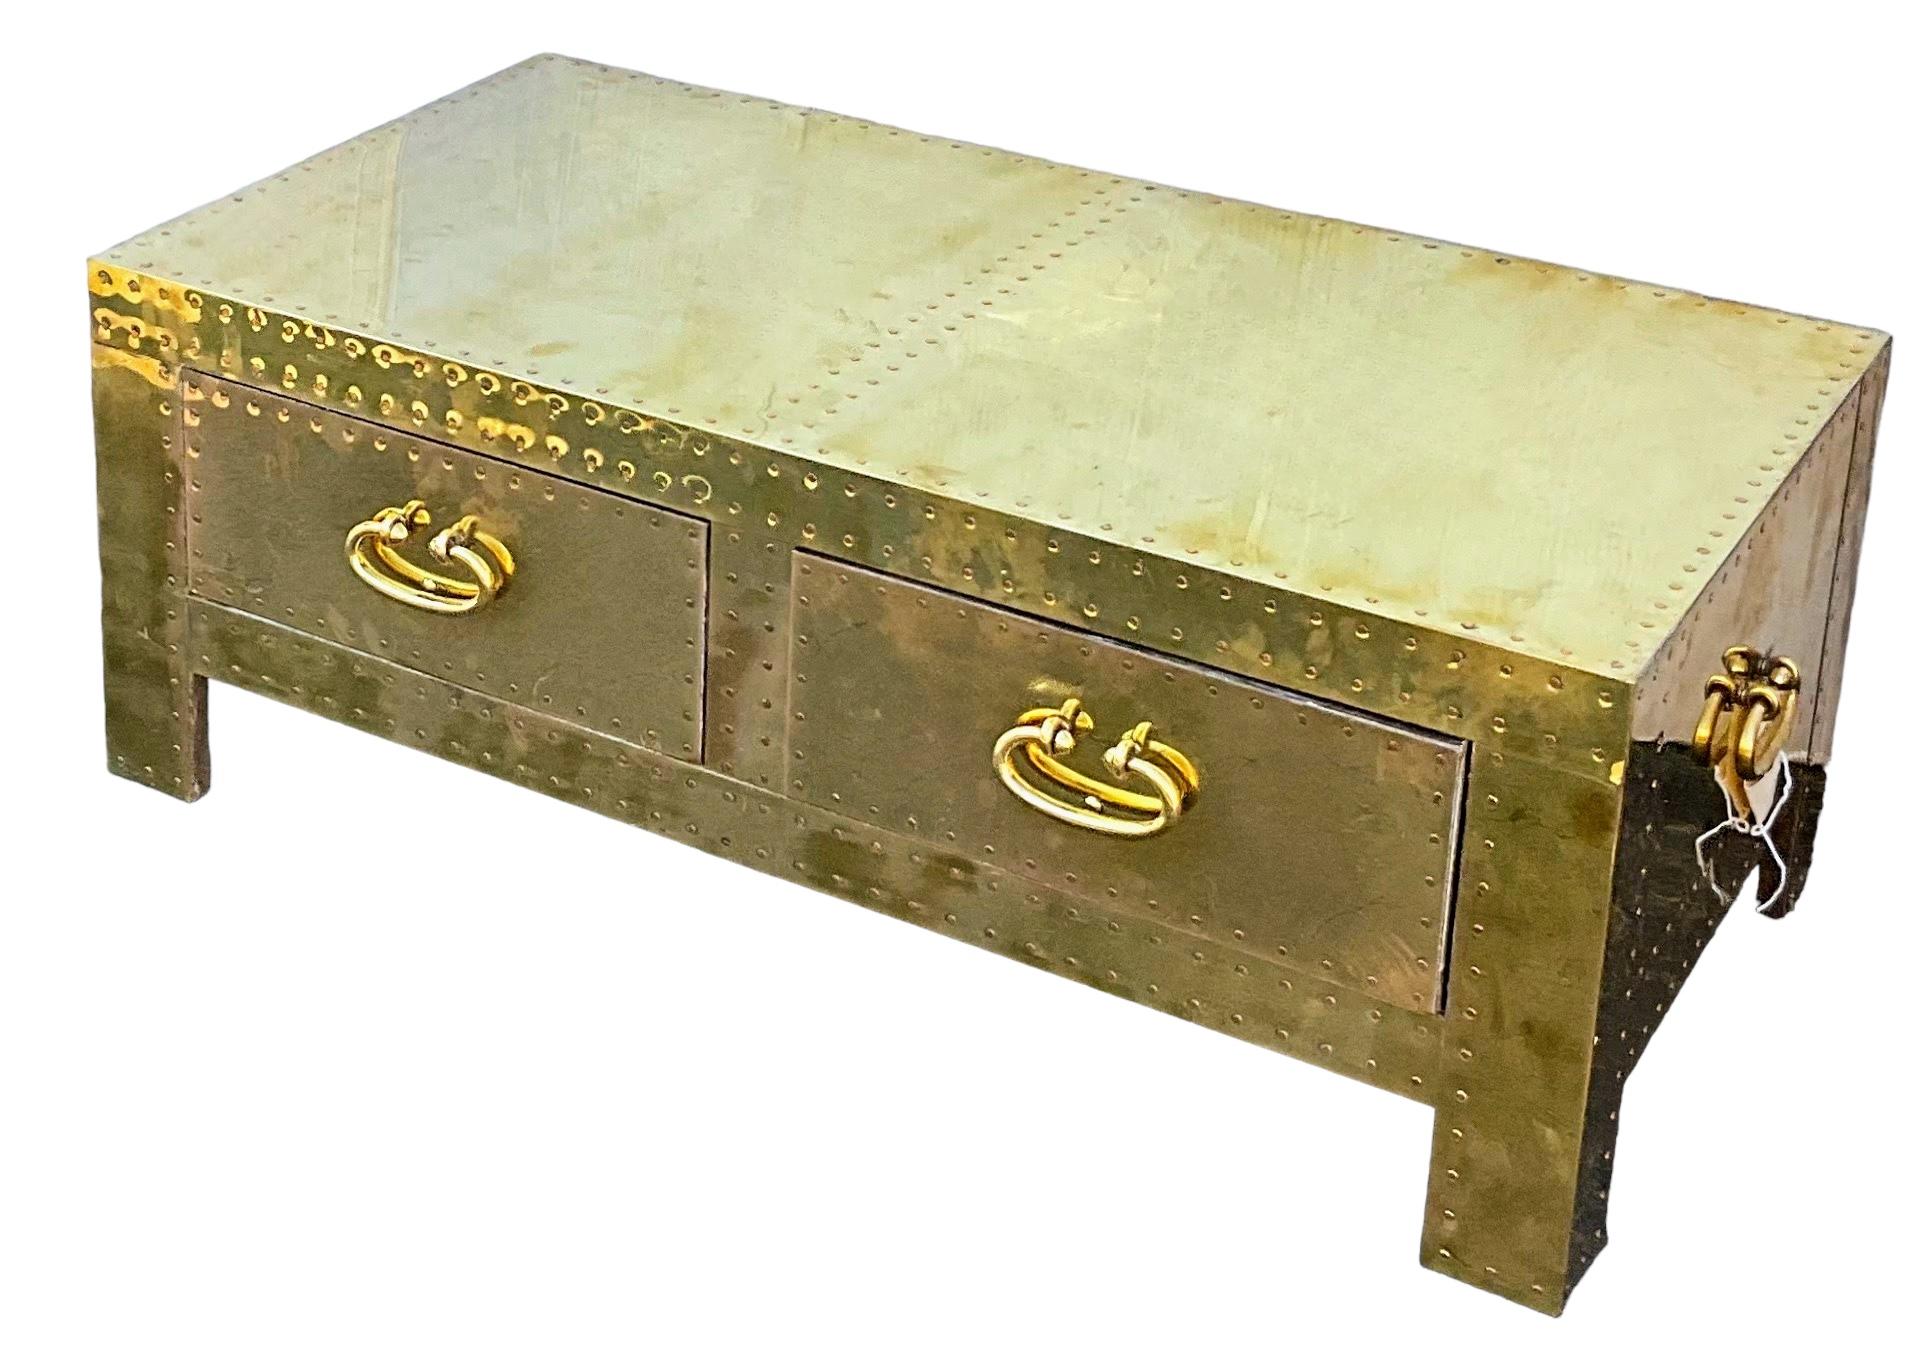 This is a campaign style brass clad trunk or coffee table by Sarreid Ltd. It has two drawers and nailhead trim throughout the body. It is a 1970s piece manufactured in Spain. It does have general wear throughout the piece.

My shipping can take two